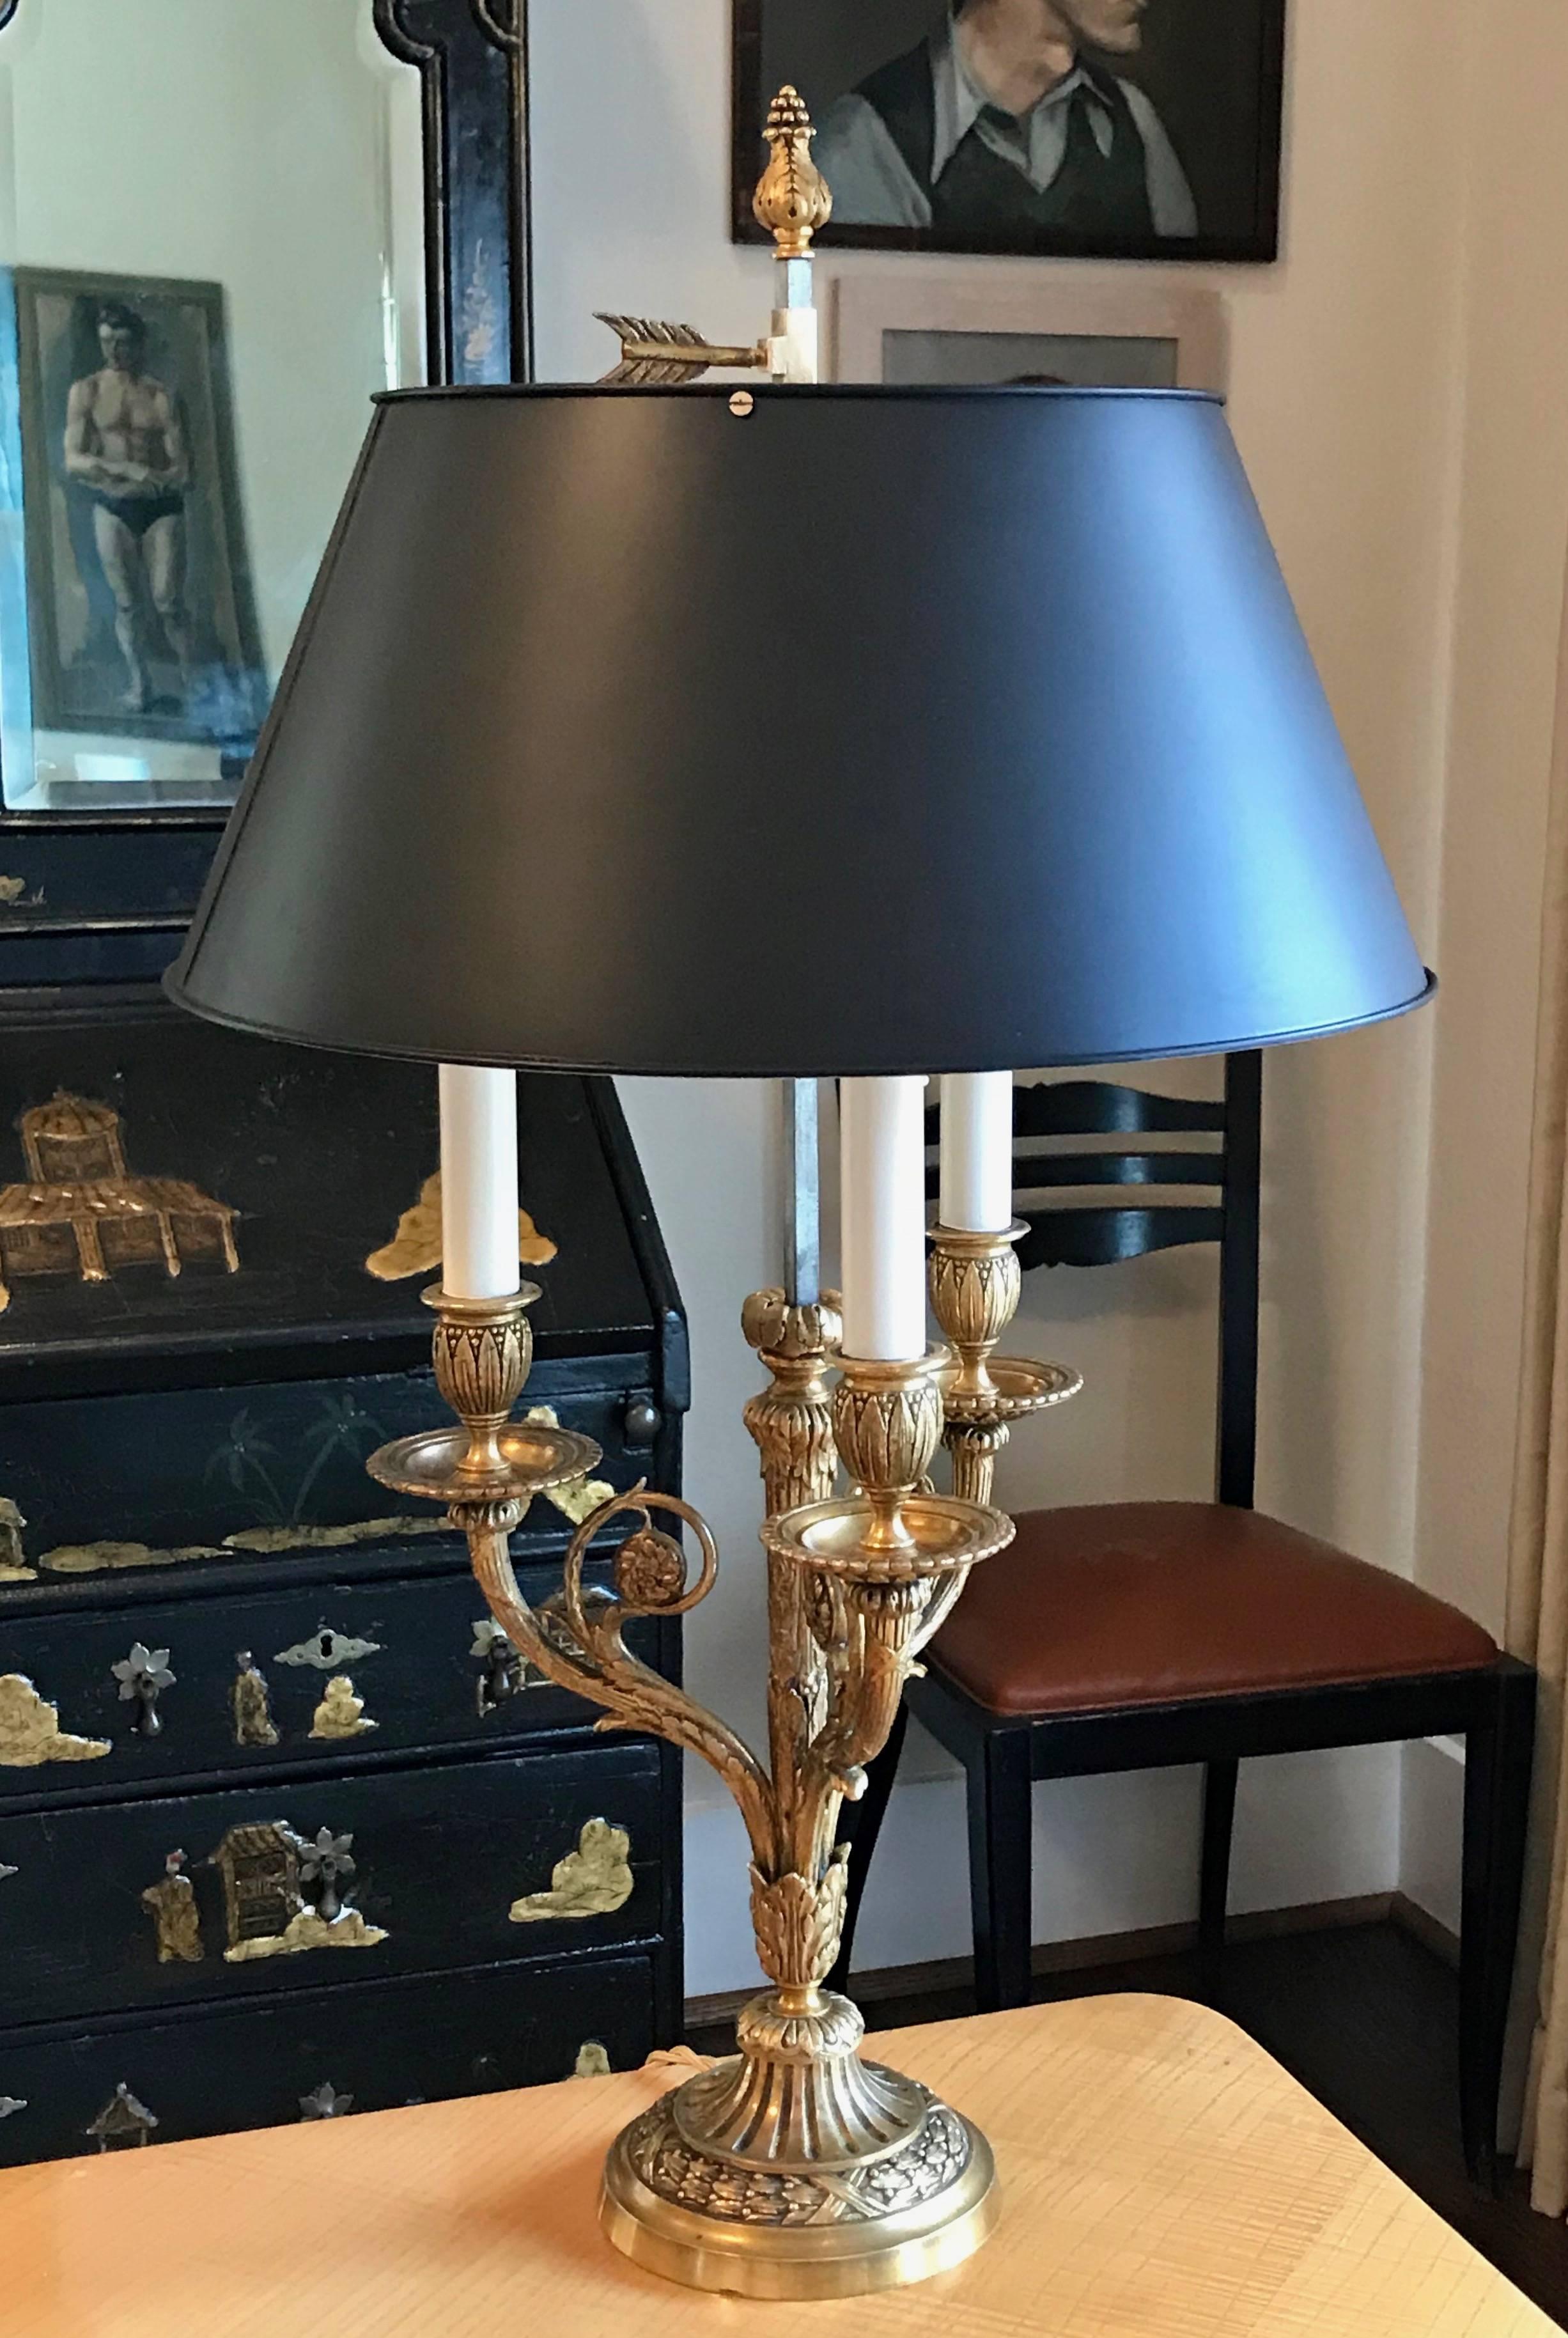 Doré gilt bronze Bouillotte lamp by the French manufacturer, Fumiere et Cie. Three arms with beautifully cast and chased classical details. Newly rewired for the US with a French style twisted rayon covered cord and thumb turn on/off switch.